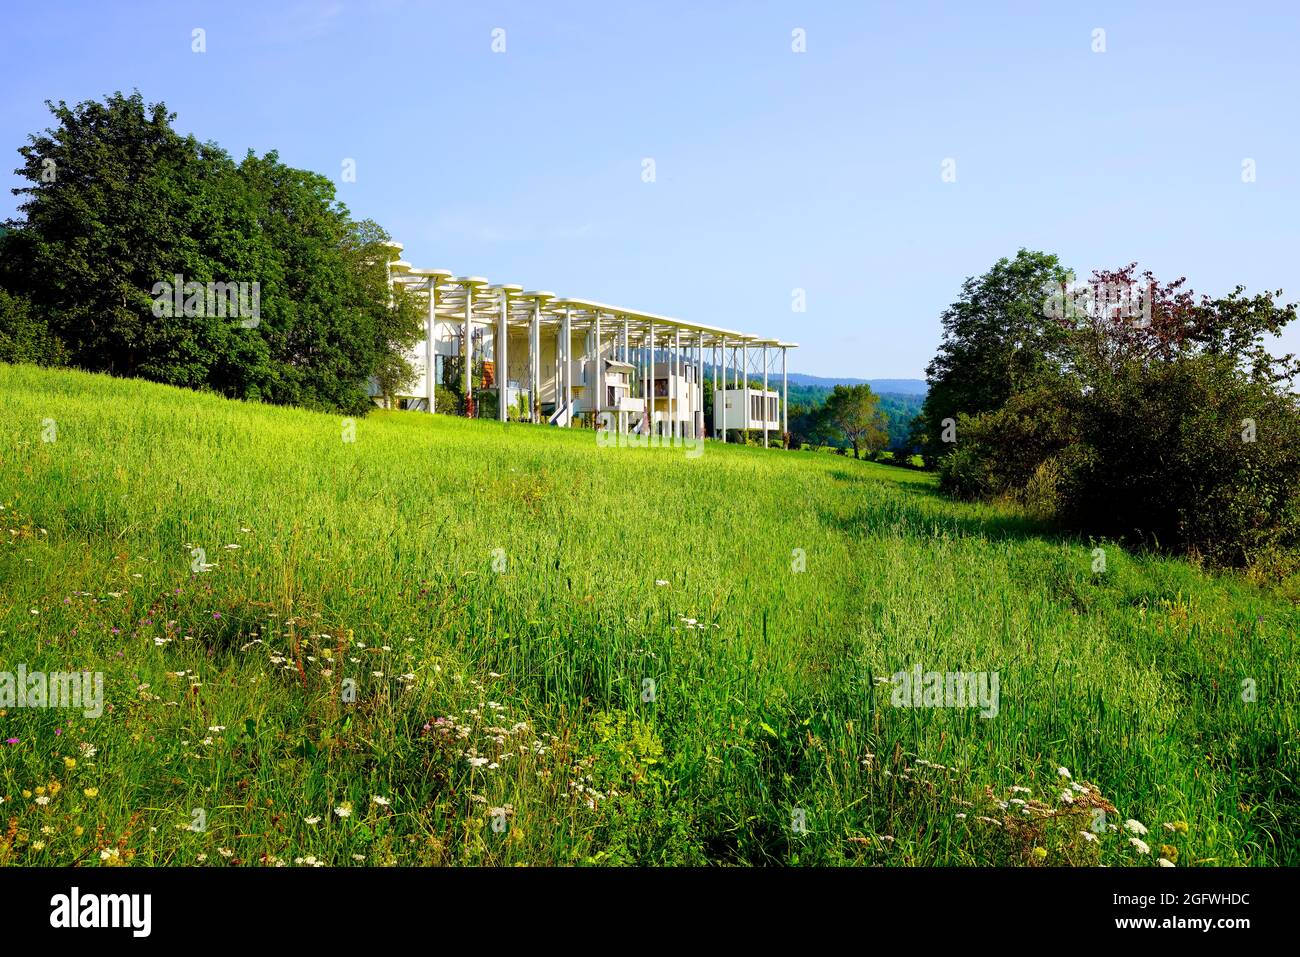 View of the Jan Michalski Foundation complex in magnificent Jura landscape. The Jan Michalski Foundation in Montricher is a place entirely dedicated t Stock Photo